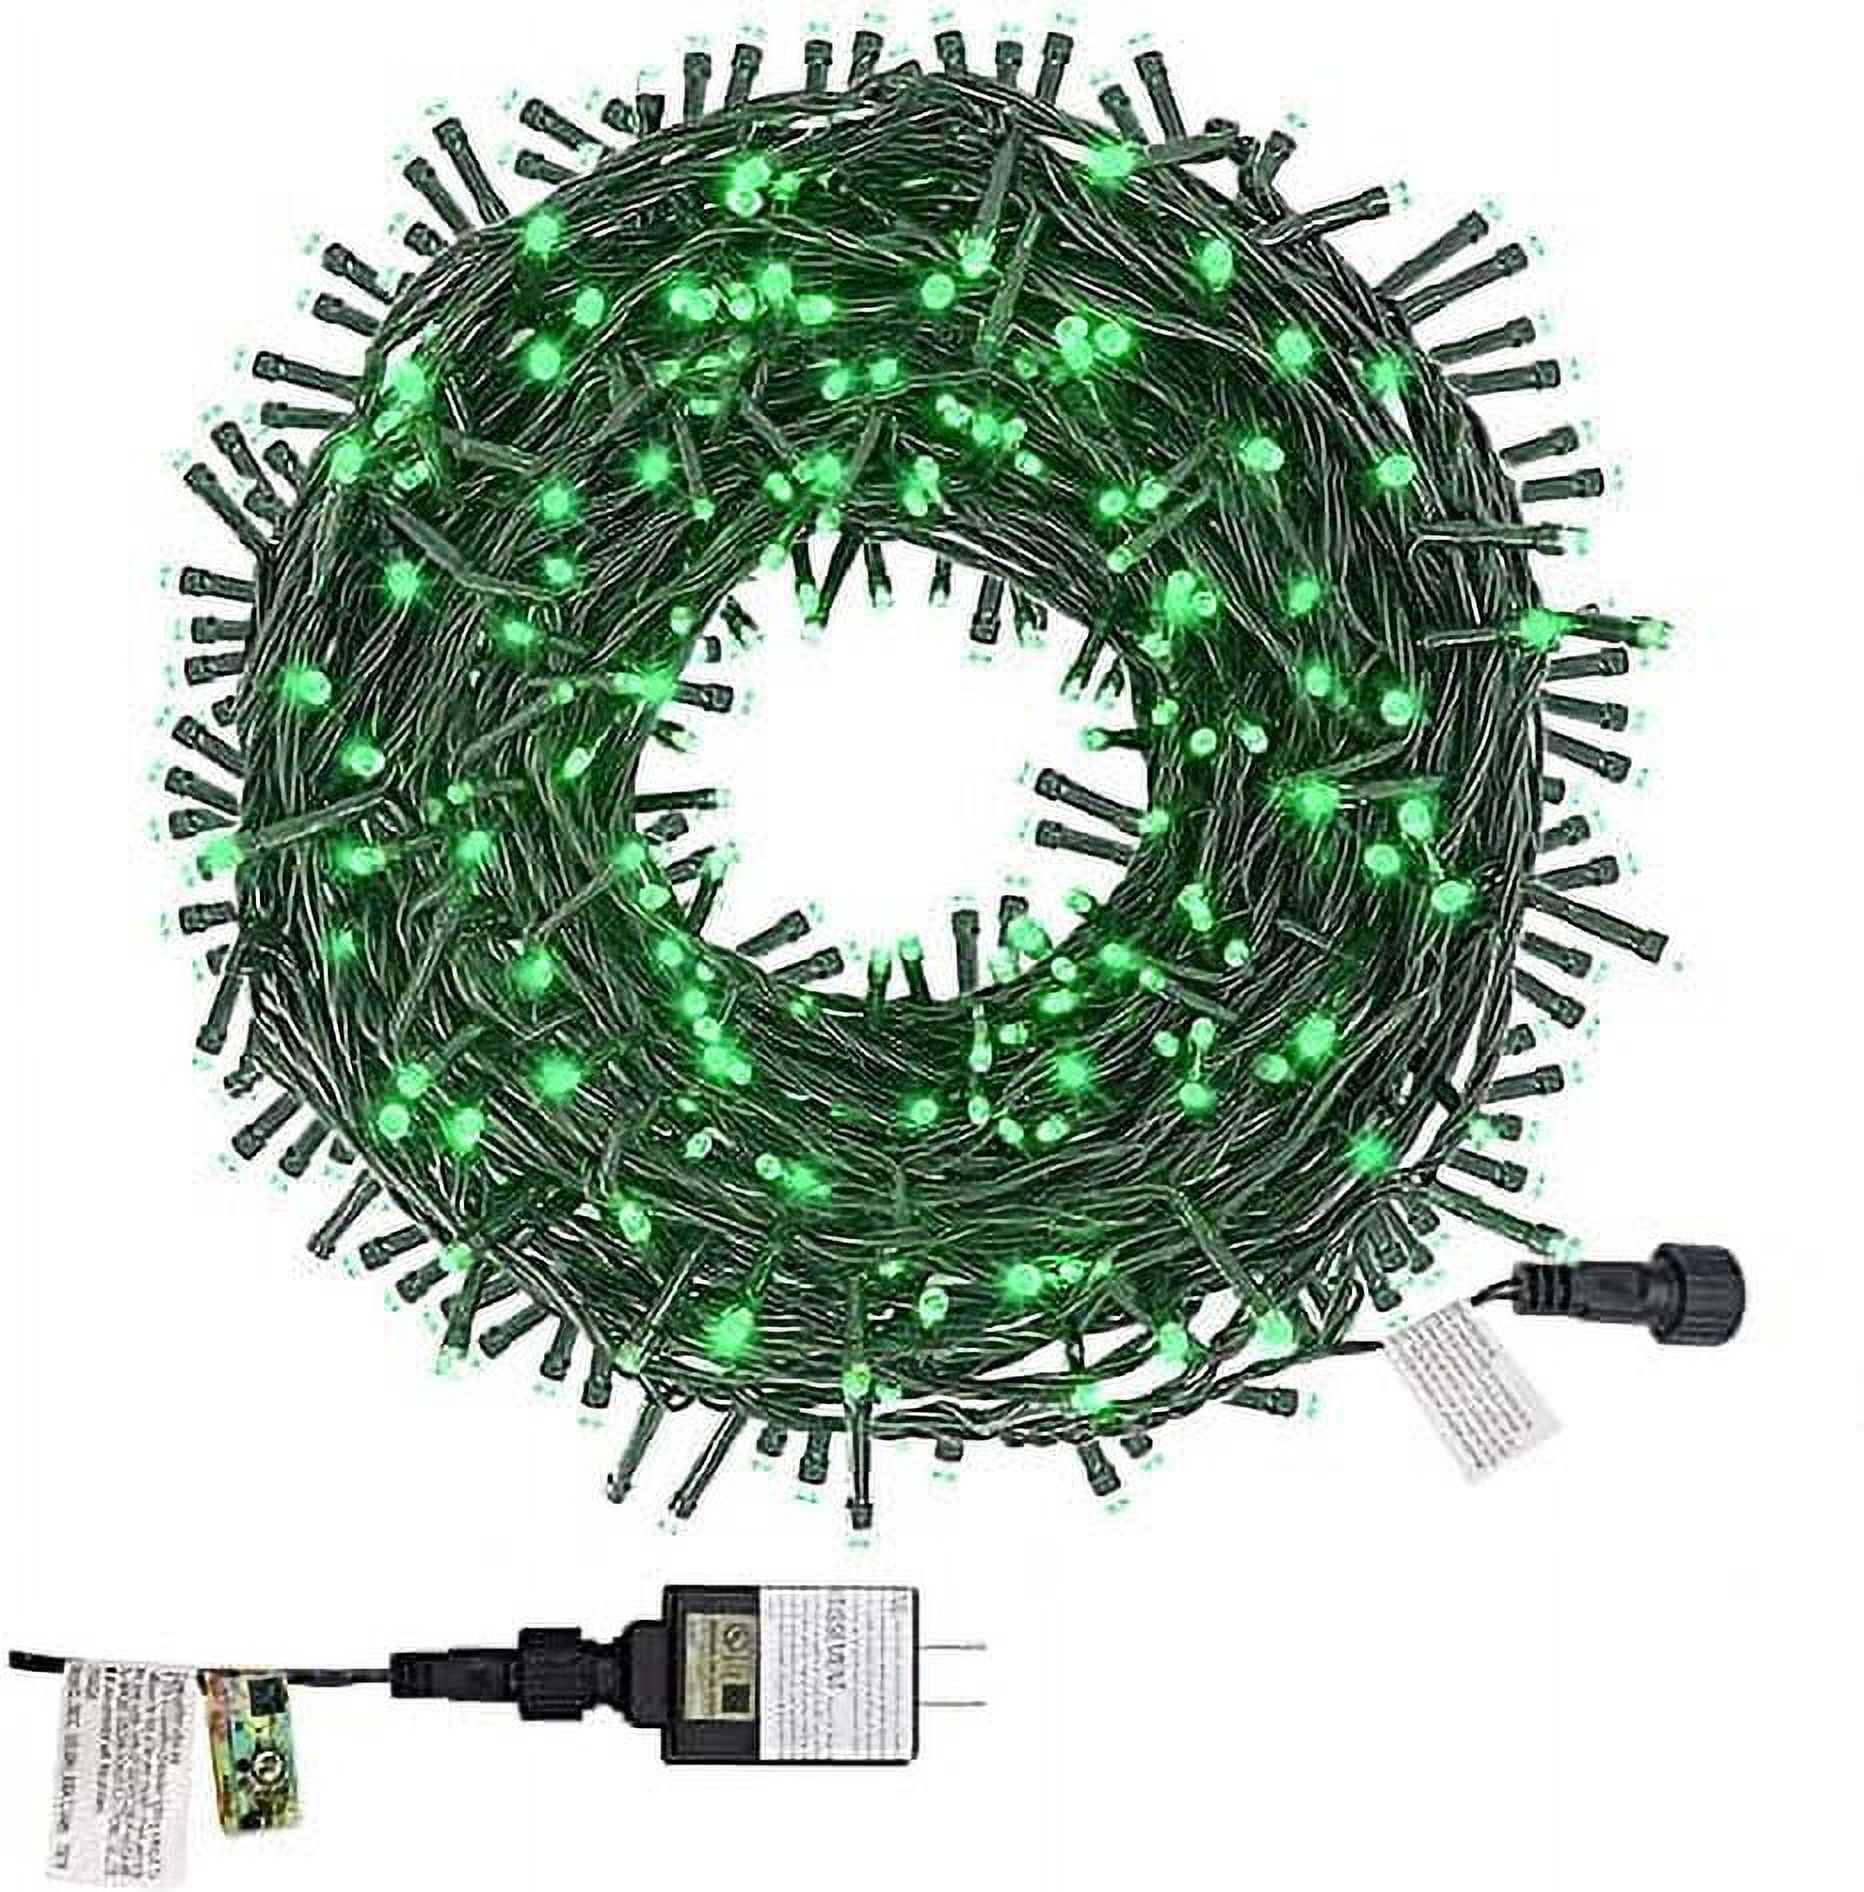 Twinkle Star 200 LED 66FT Christmas Fairy String Lights, St Patricks Day Lights with 8 Lighting Modes, Mini String Lights Plug in for Indoor Outdoor Halloween Garden Wedding Party Decoration, Green - image 2 of 8